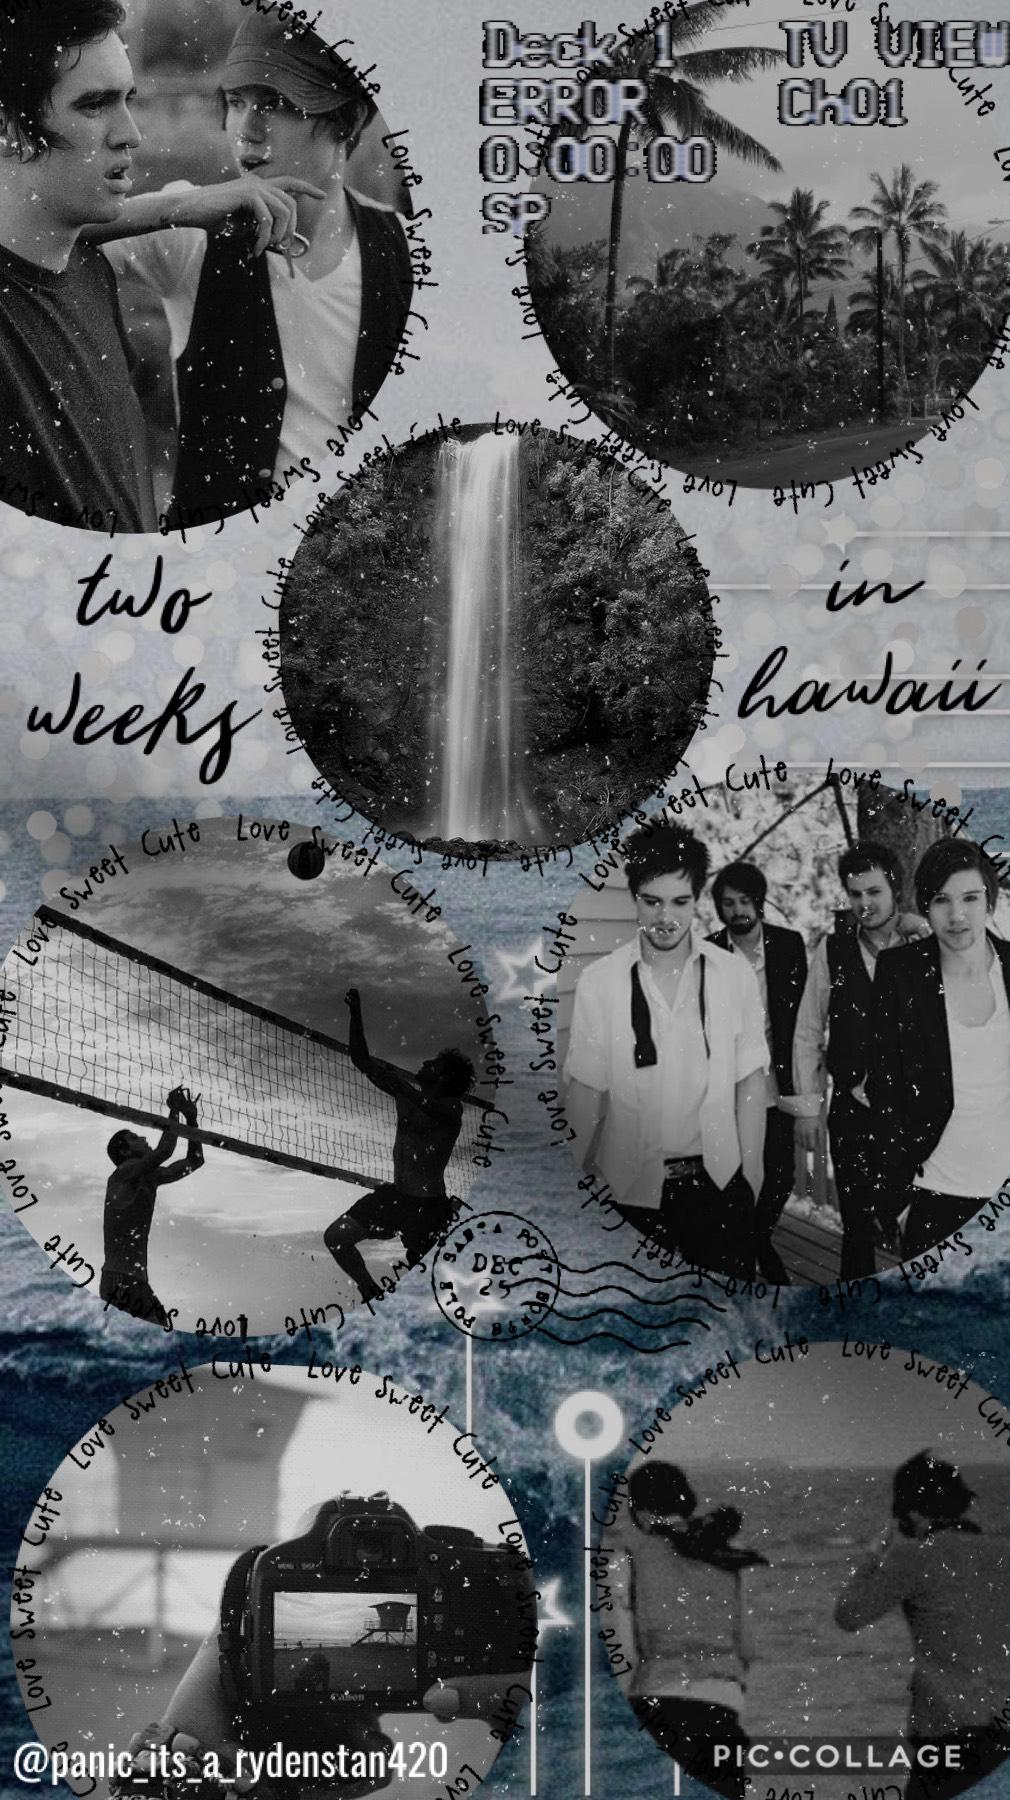 hello I just finished the ryden fic, two weeks in hawaii, and holy jesus it was so good and made me sob. 10/10 would recommend :) i also have a crush story i have to tell you guys about ;) 